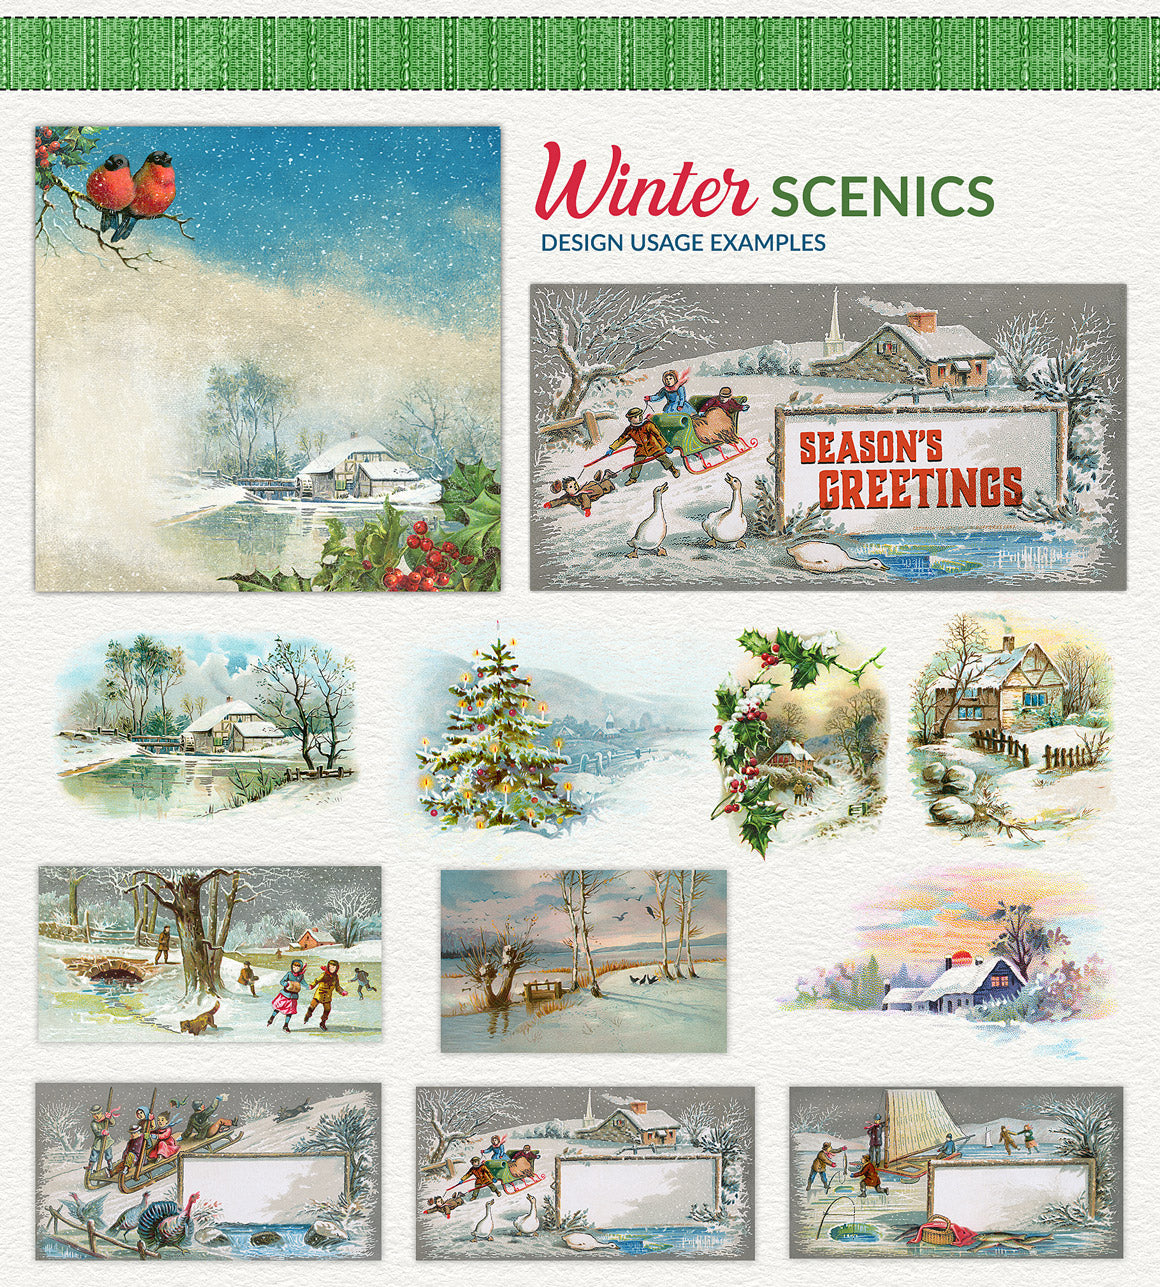 Vintage snowy Christmas winter scenics illustraion graphics with design usage examples.